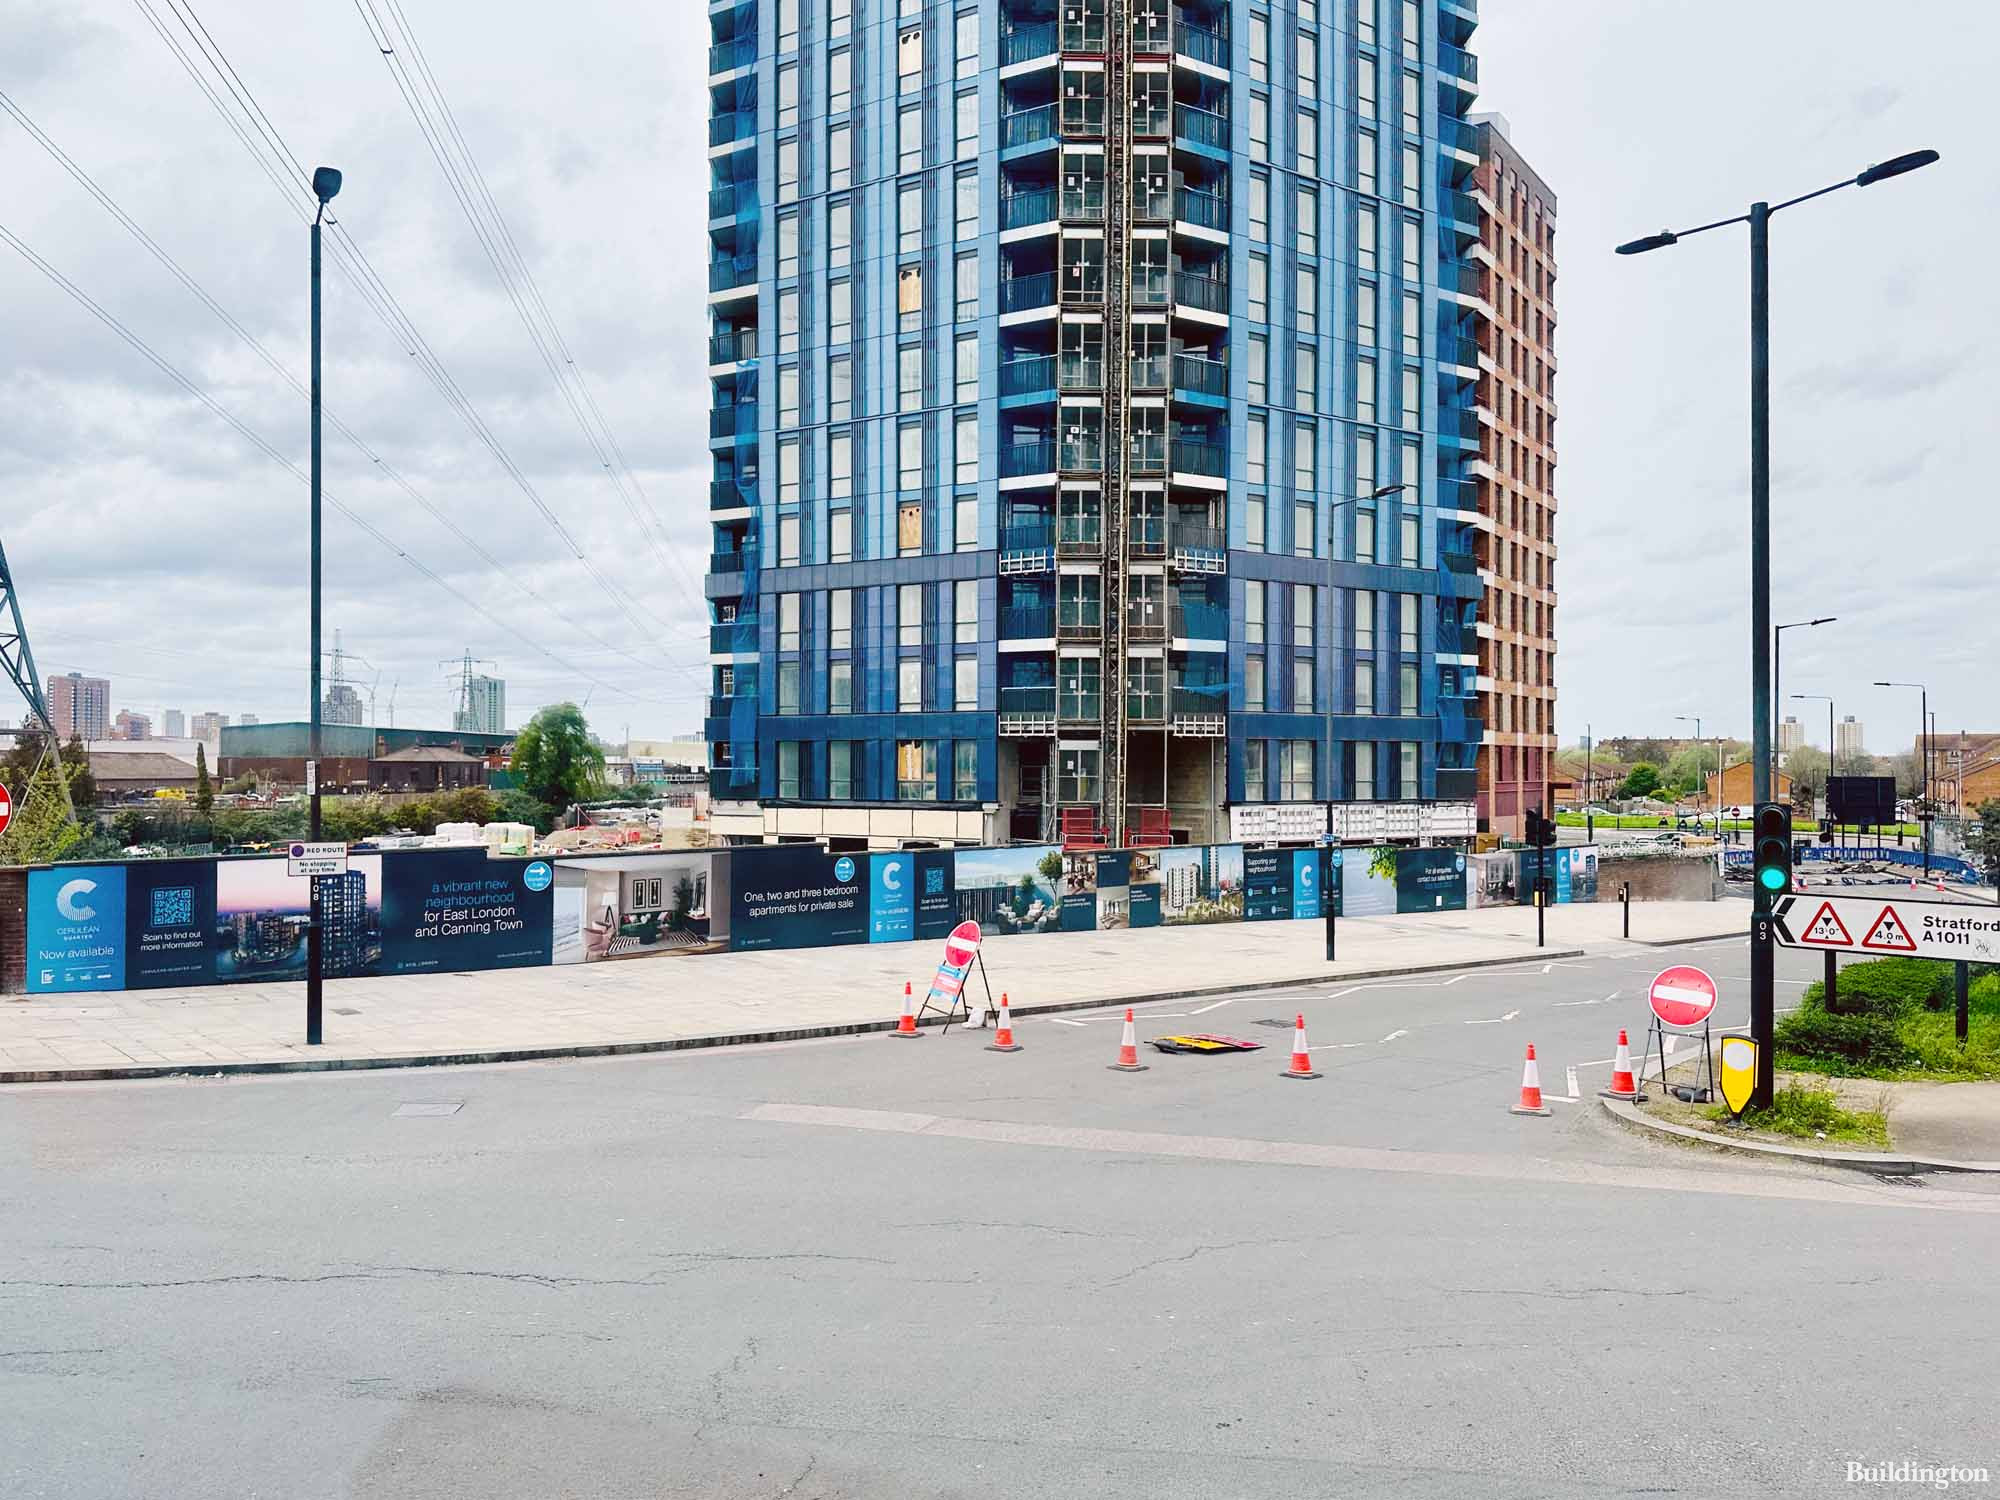 Cerulean Quarter development of apartments near Canning Town Station in London E16.